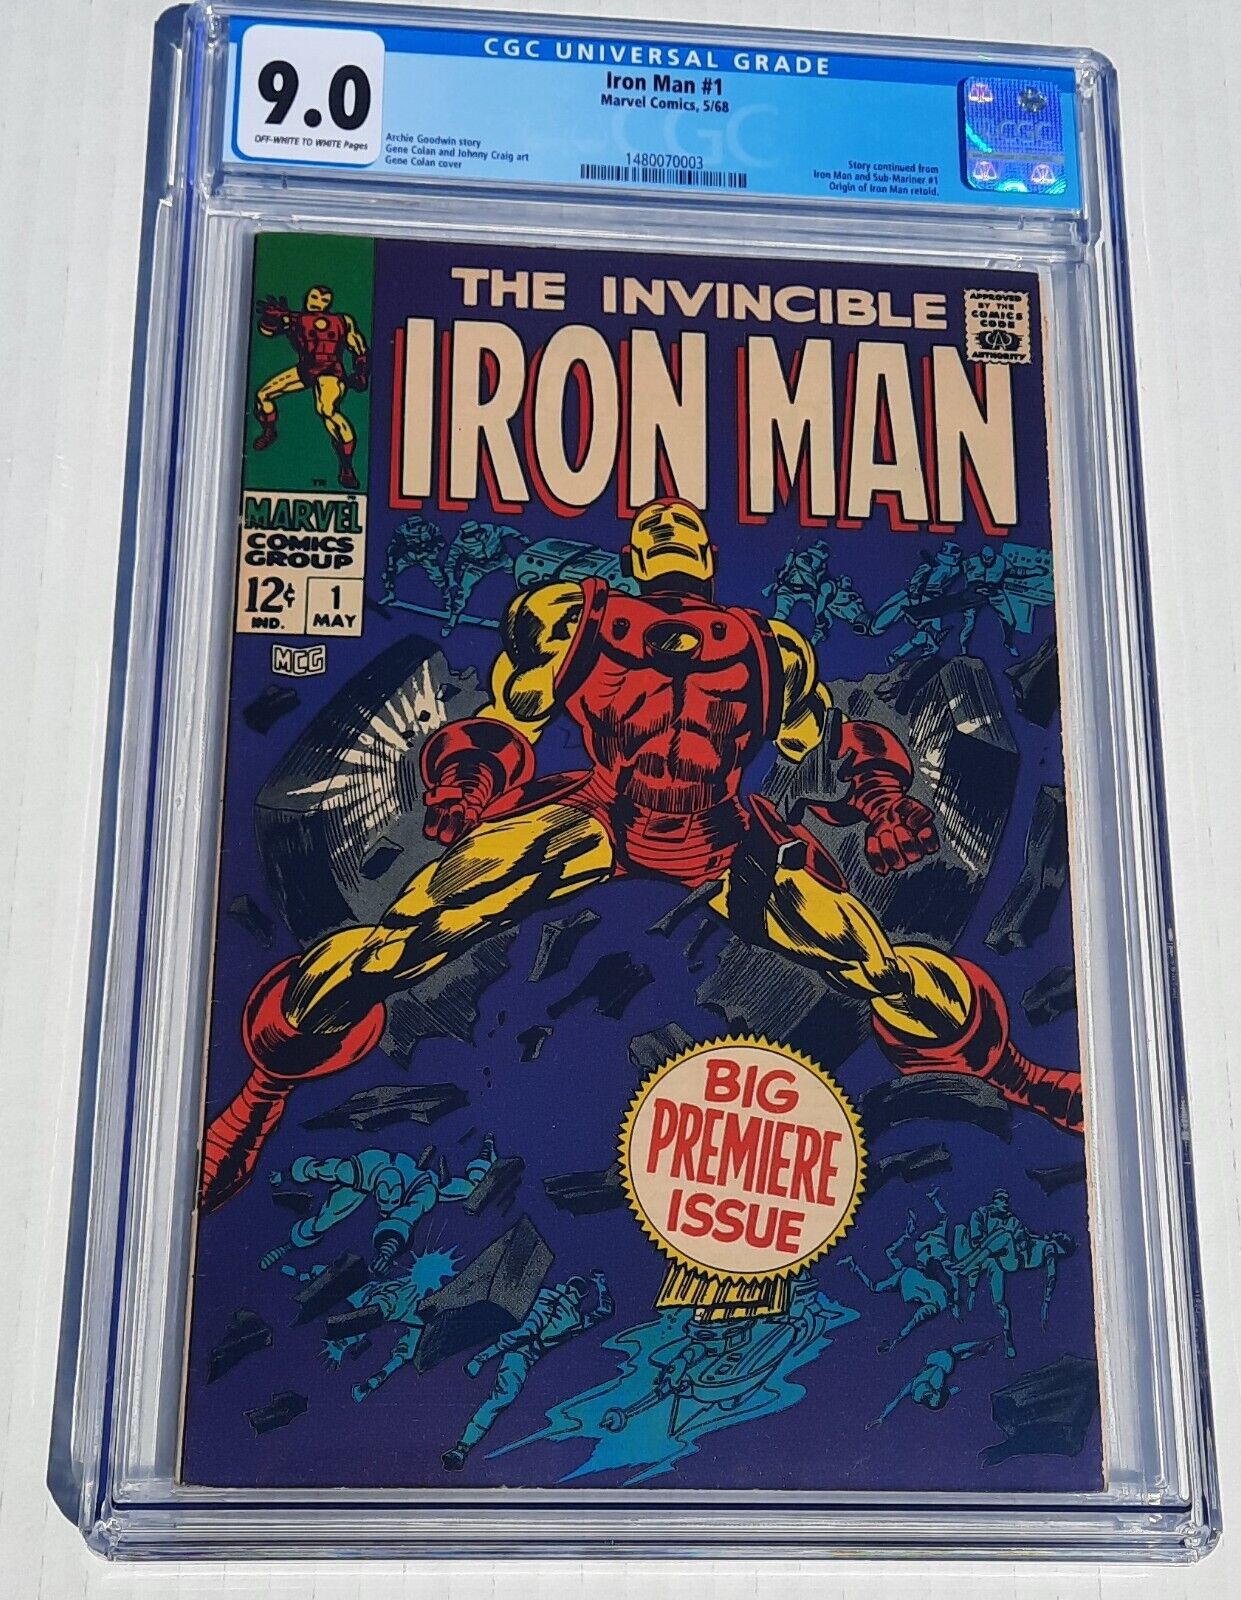 Iron Man 1 CGC 90 1968 Marvel OWWHITE PAGES 1st Solo Issue  ORIGIN RETOLD